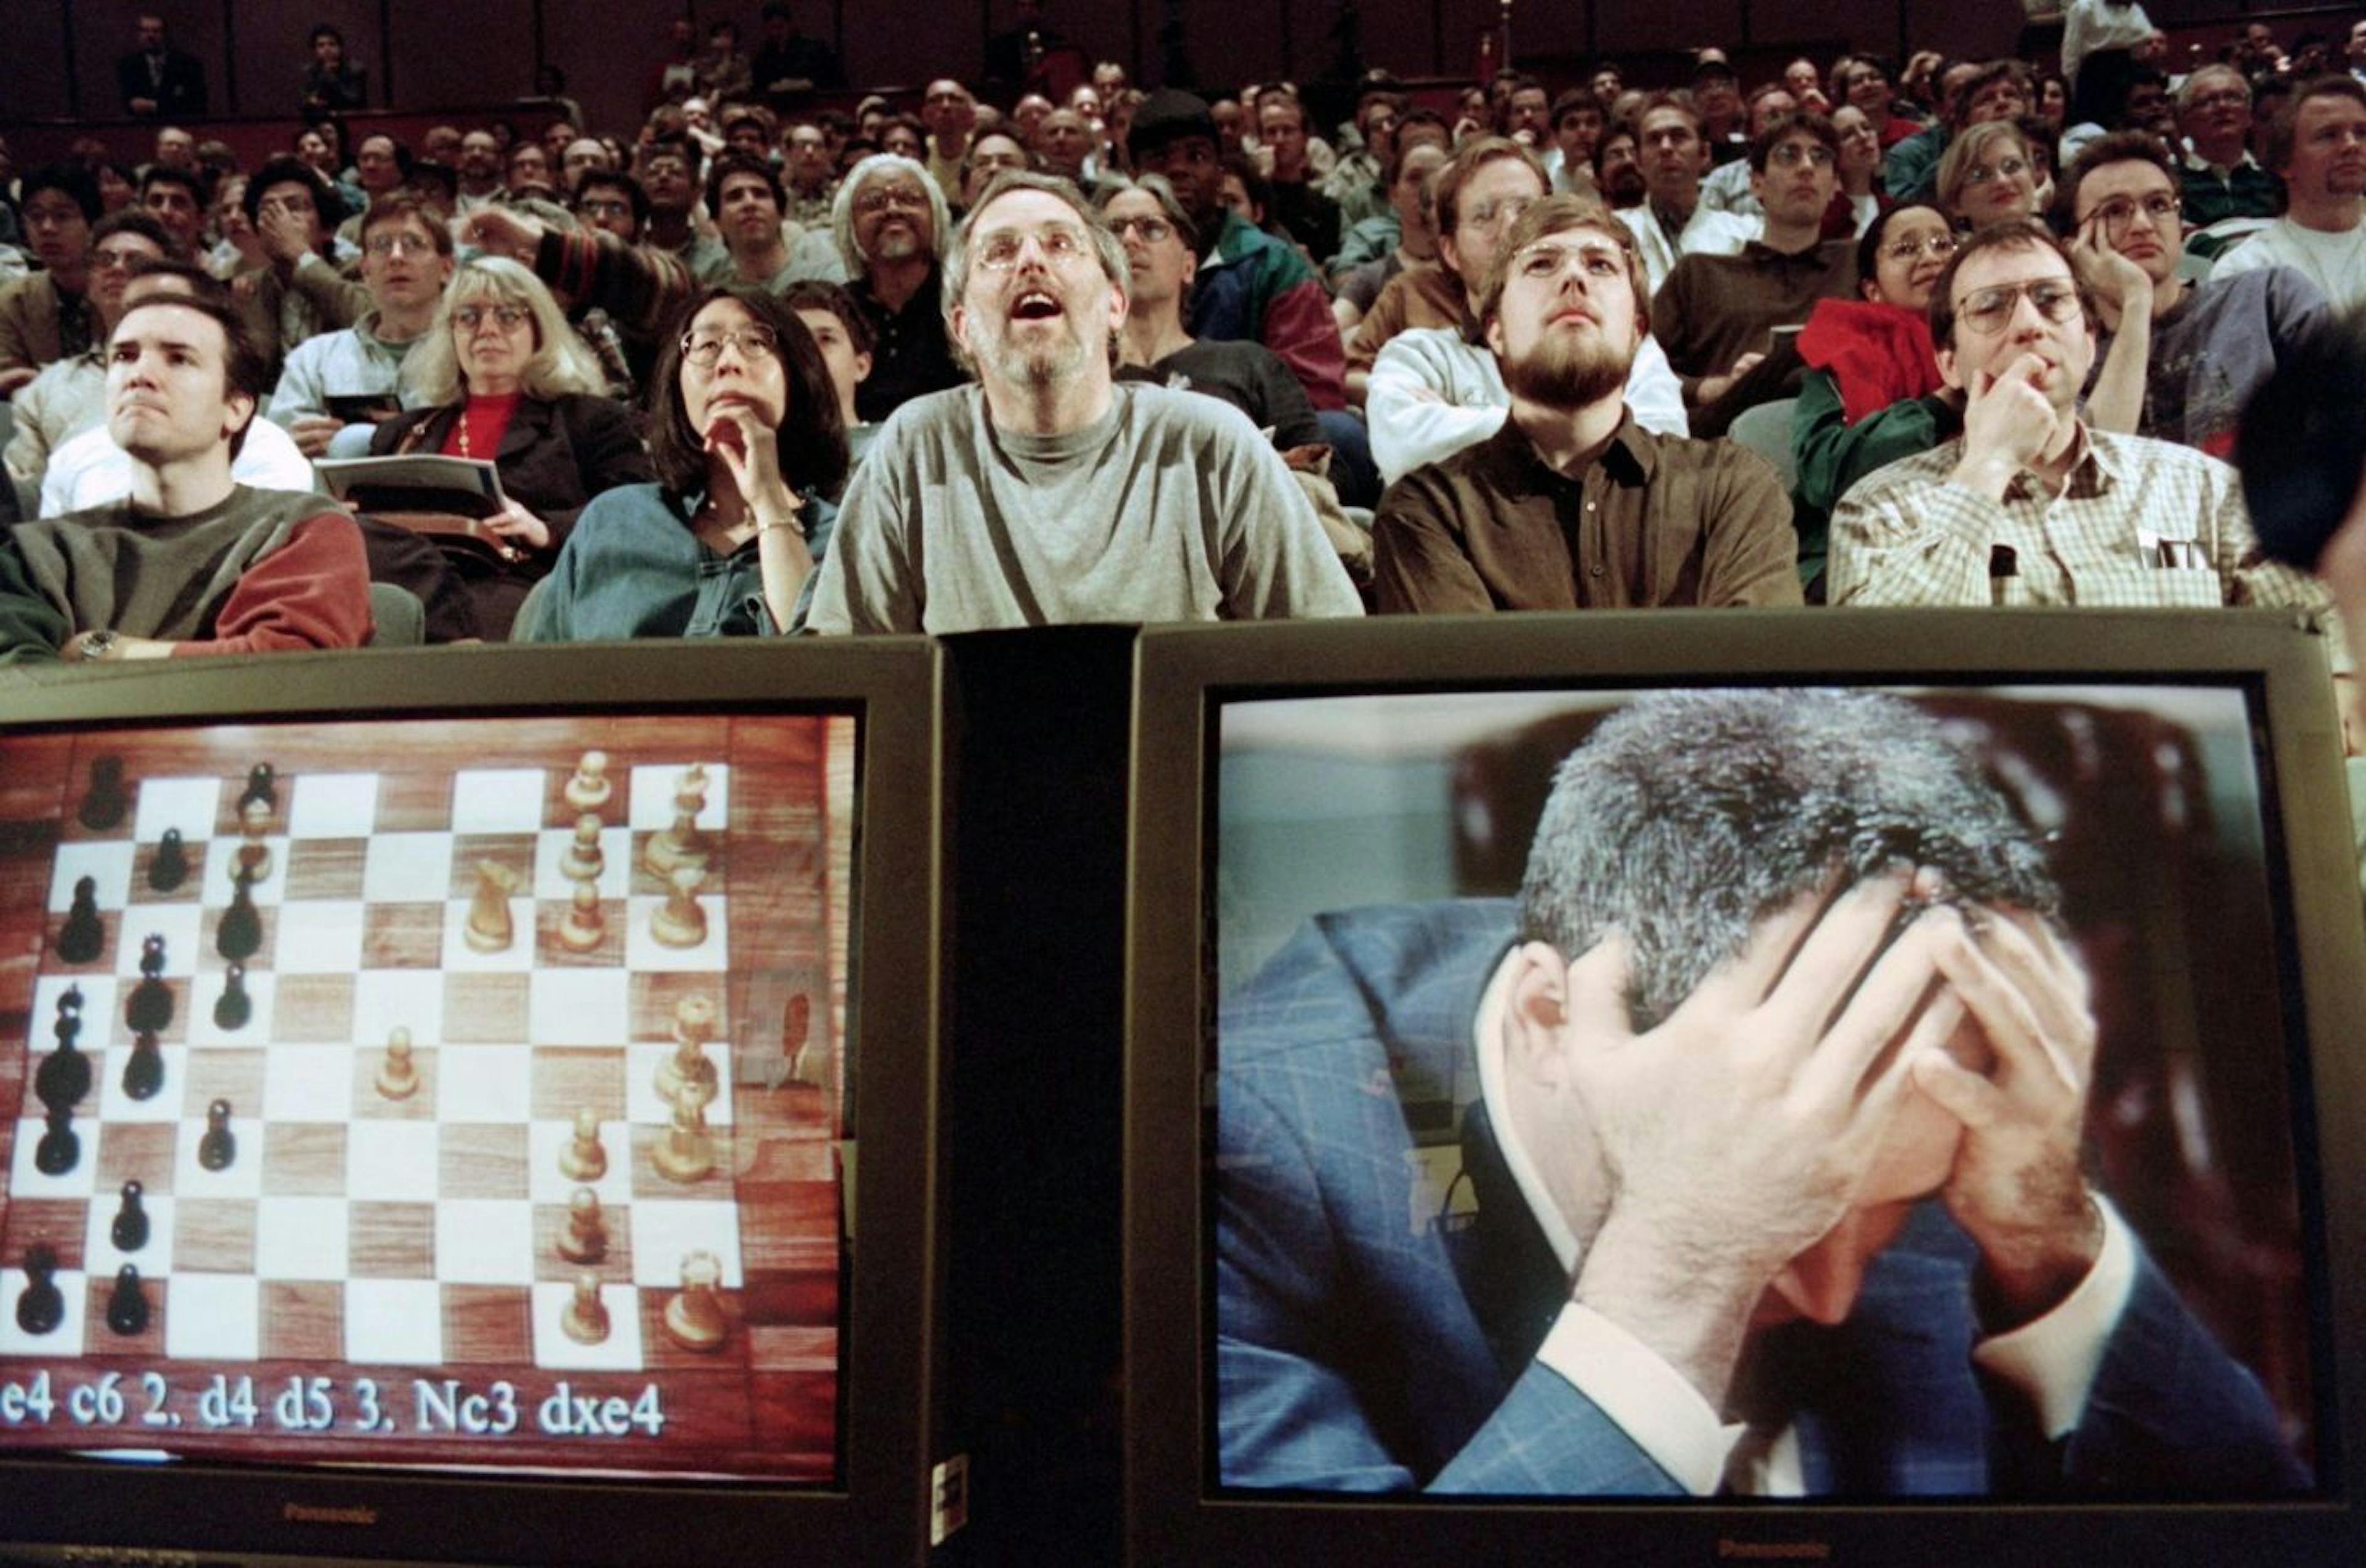 Garry Kasparov, World Chess champion, loses to IBM's Deep Blue in 1997,  putting AI in the spotlight